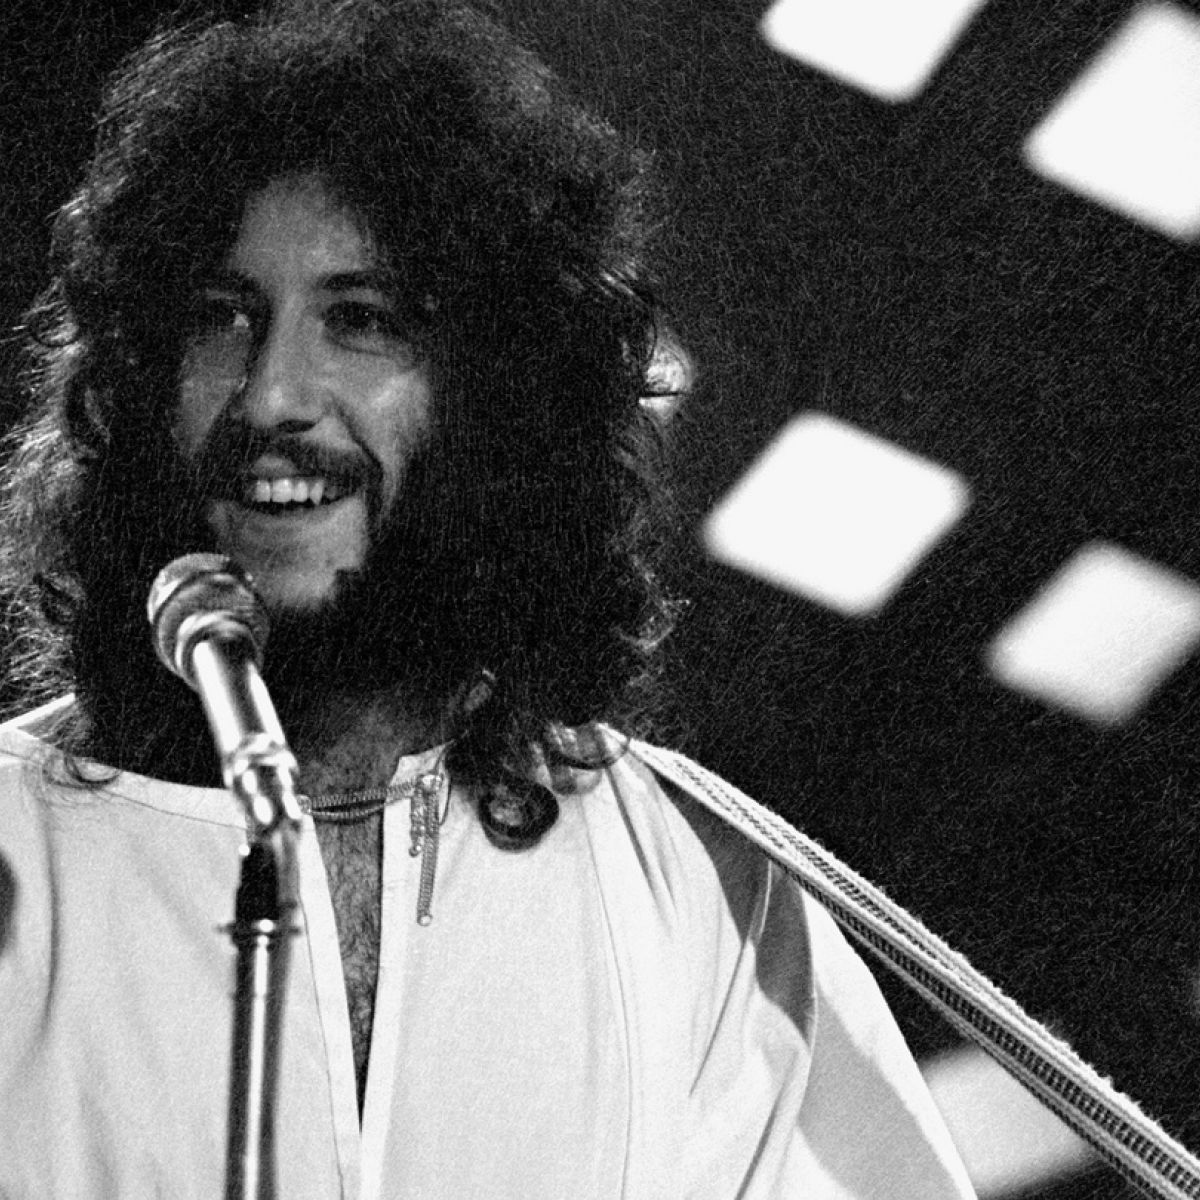 Peter Green obituary: Fleetwood Mac founder and guitar pioneer who made the  blues his own